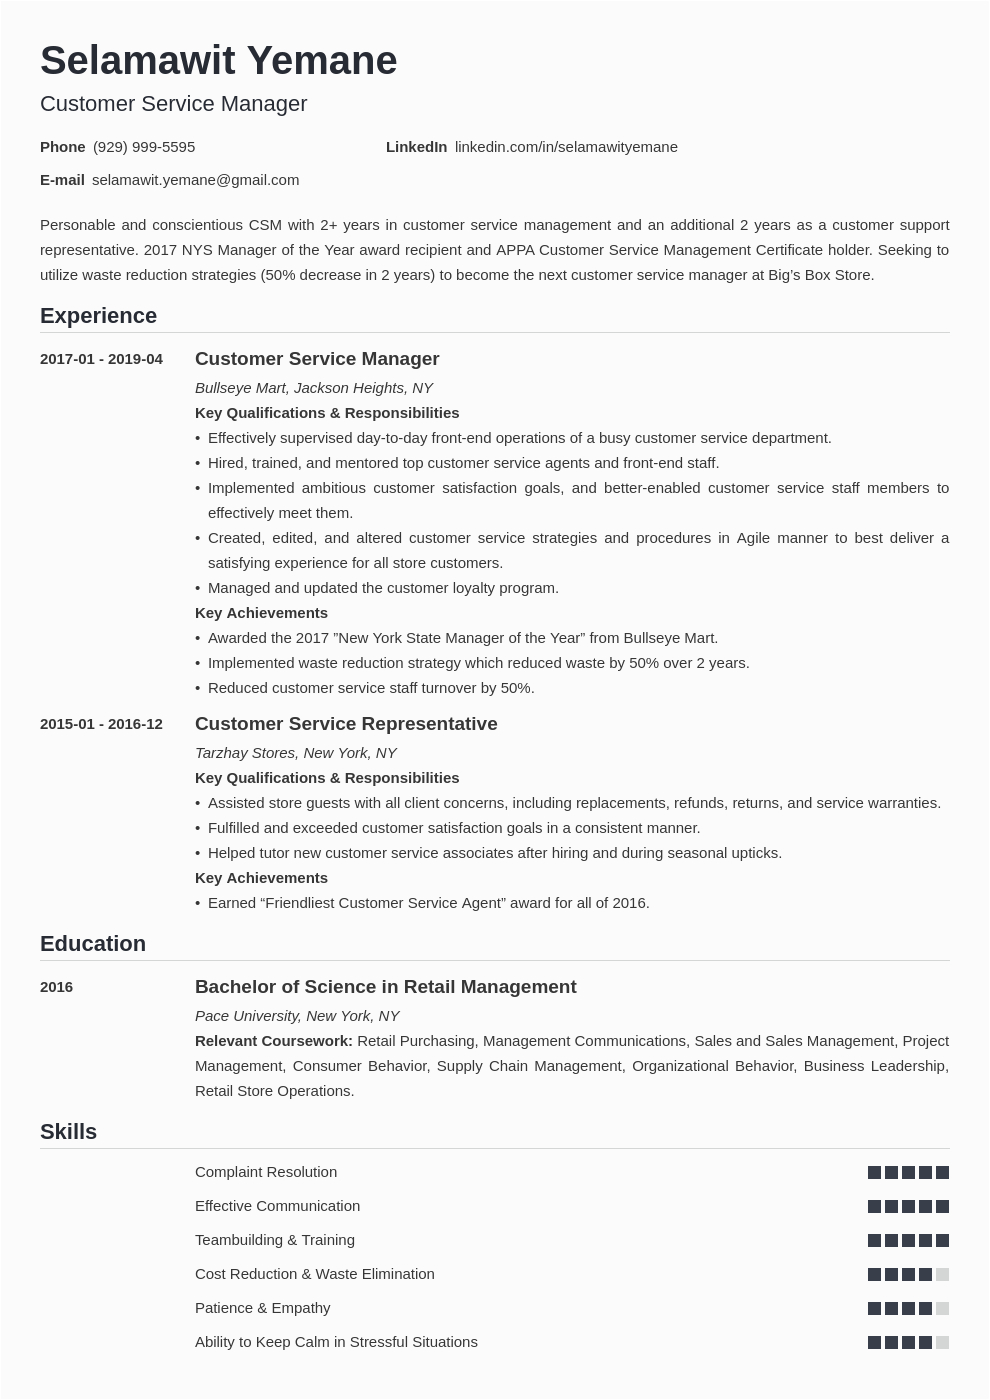 Customer Service Manager Resume Templates Samples Customer Service Manager Resume Sample [ Job Description]